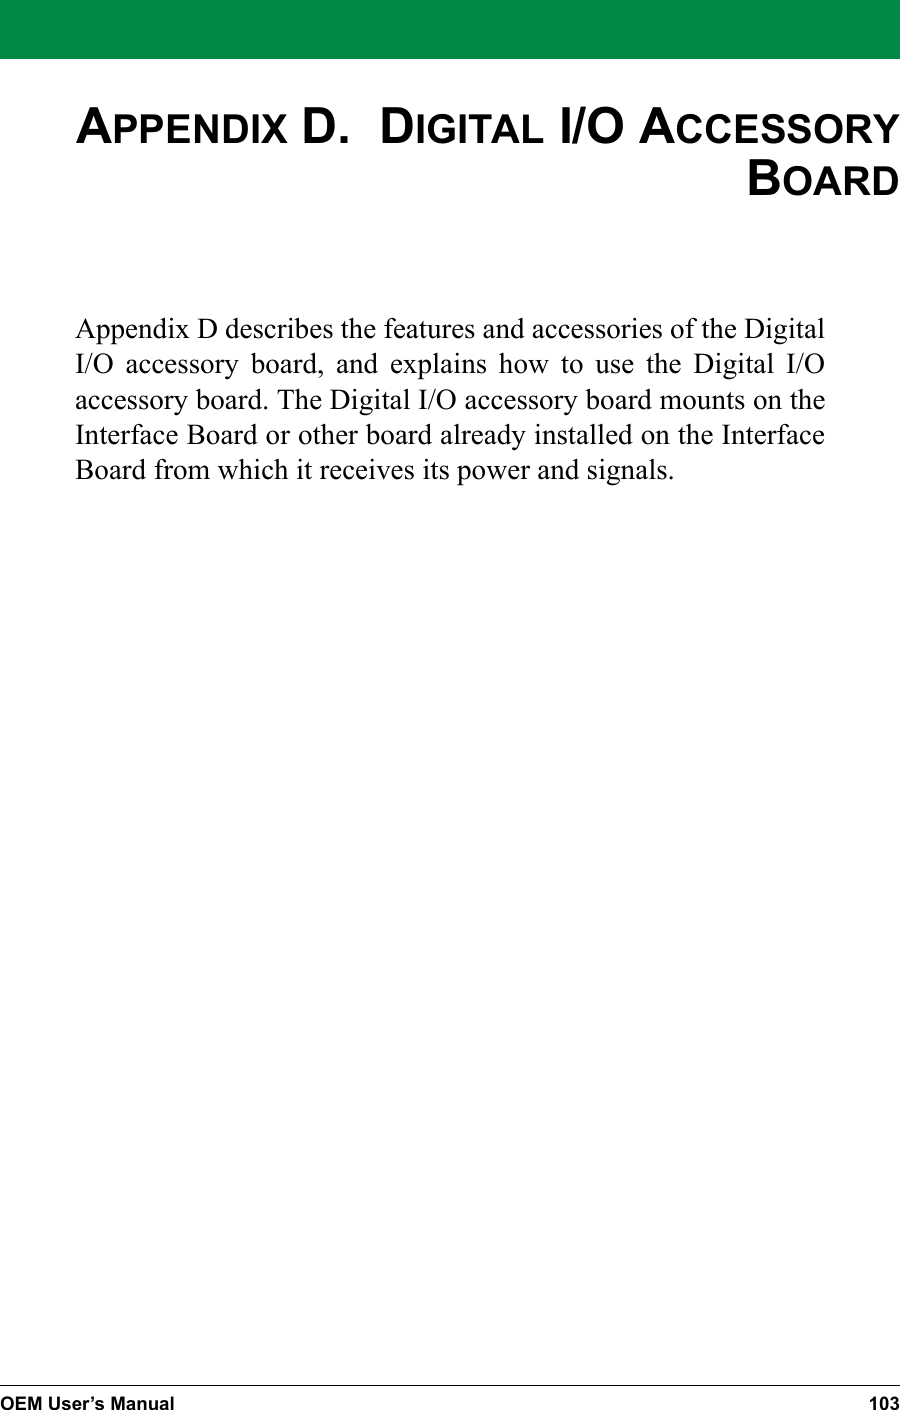 OEM User’s Manual 103APPENDIX D.  DIGITAL I/O ACCESSORY BOARDAppendix D describes the features and accessories of the Digital I/O accessory board, and explains how to use the Digital I/O accessory board. The Digital I/O accessory board mounts on the Interface Board or other board already installed on the Interface Board from which it receives its power and signals.